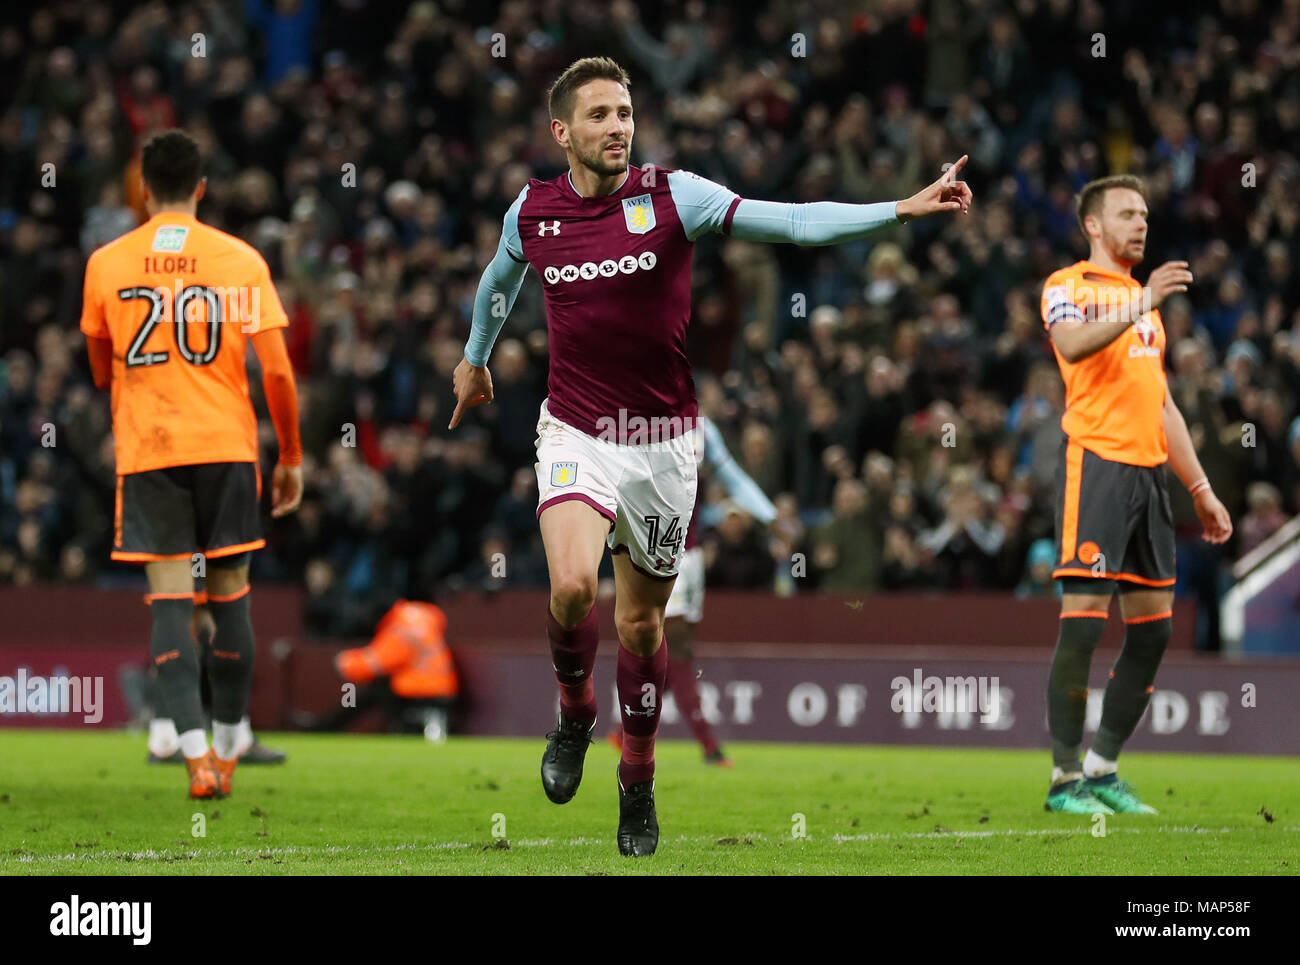 Aston Villa's Conor Hourihane celebrates scoring his side's second goal of the game during the Sky Bet Championship match at Villa Park, Birmingham. Stock Photo